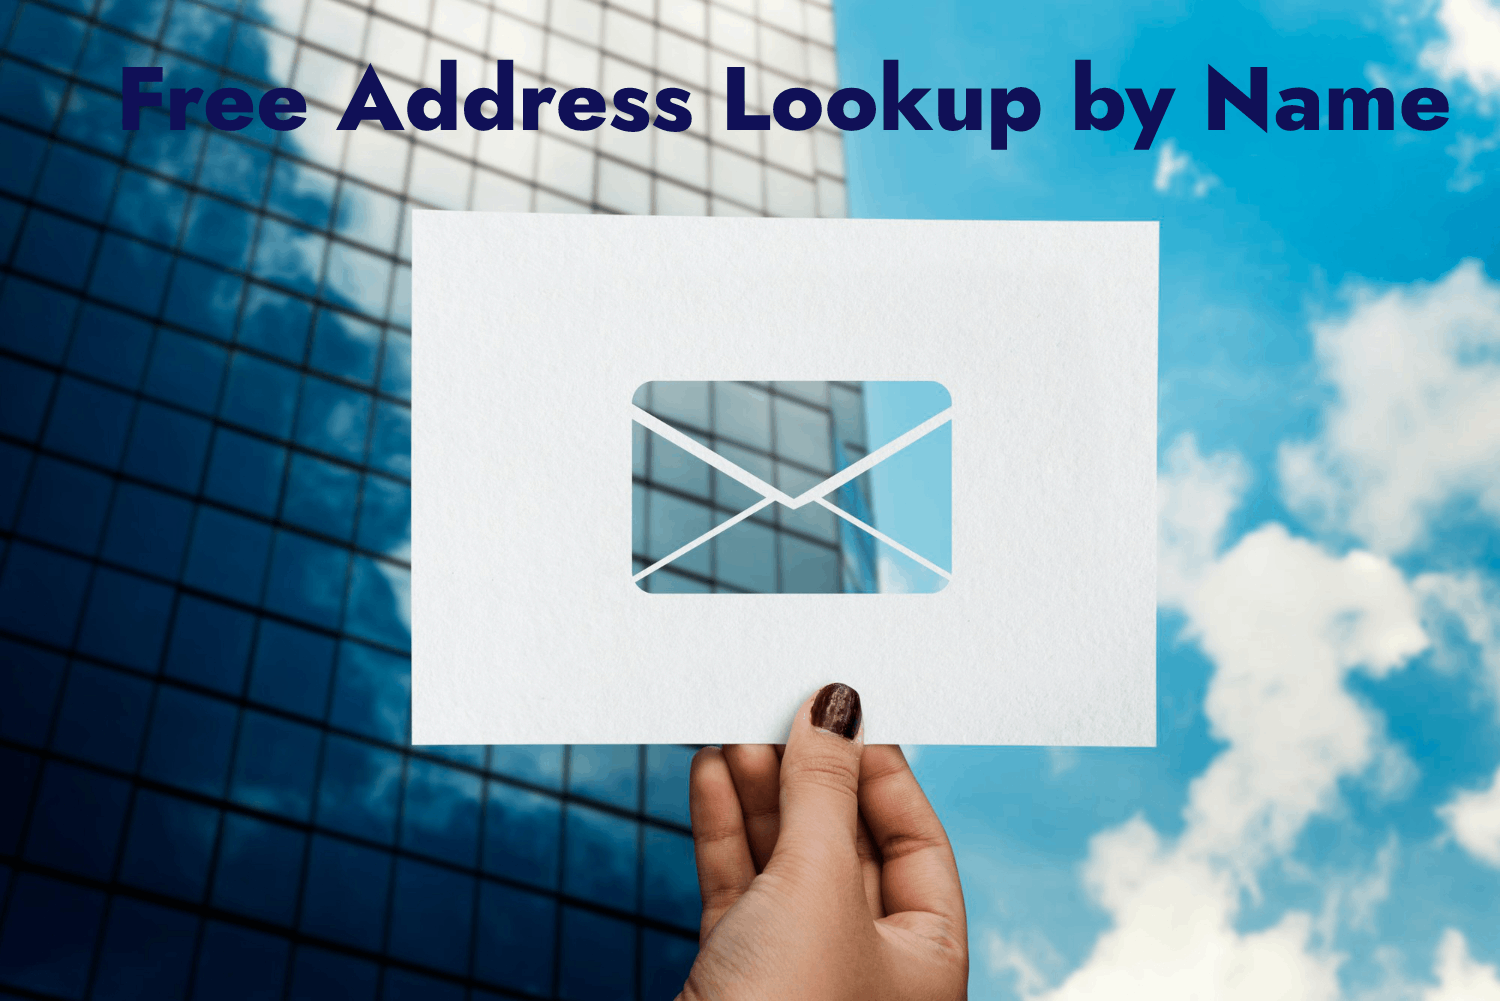 Free Address Lookup by Name